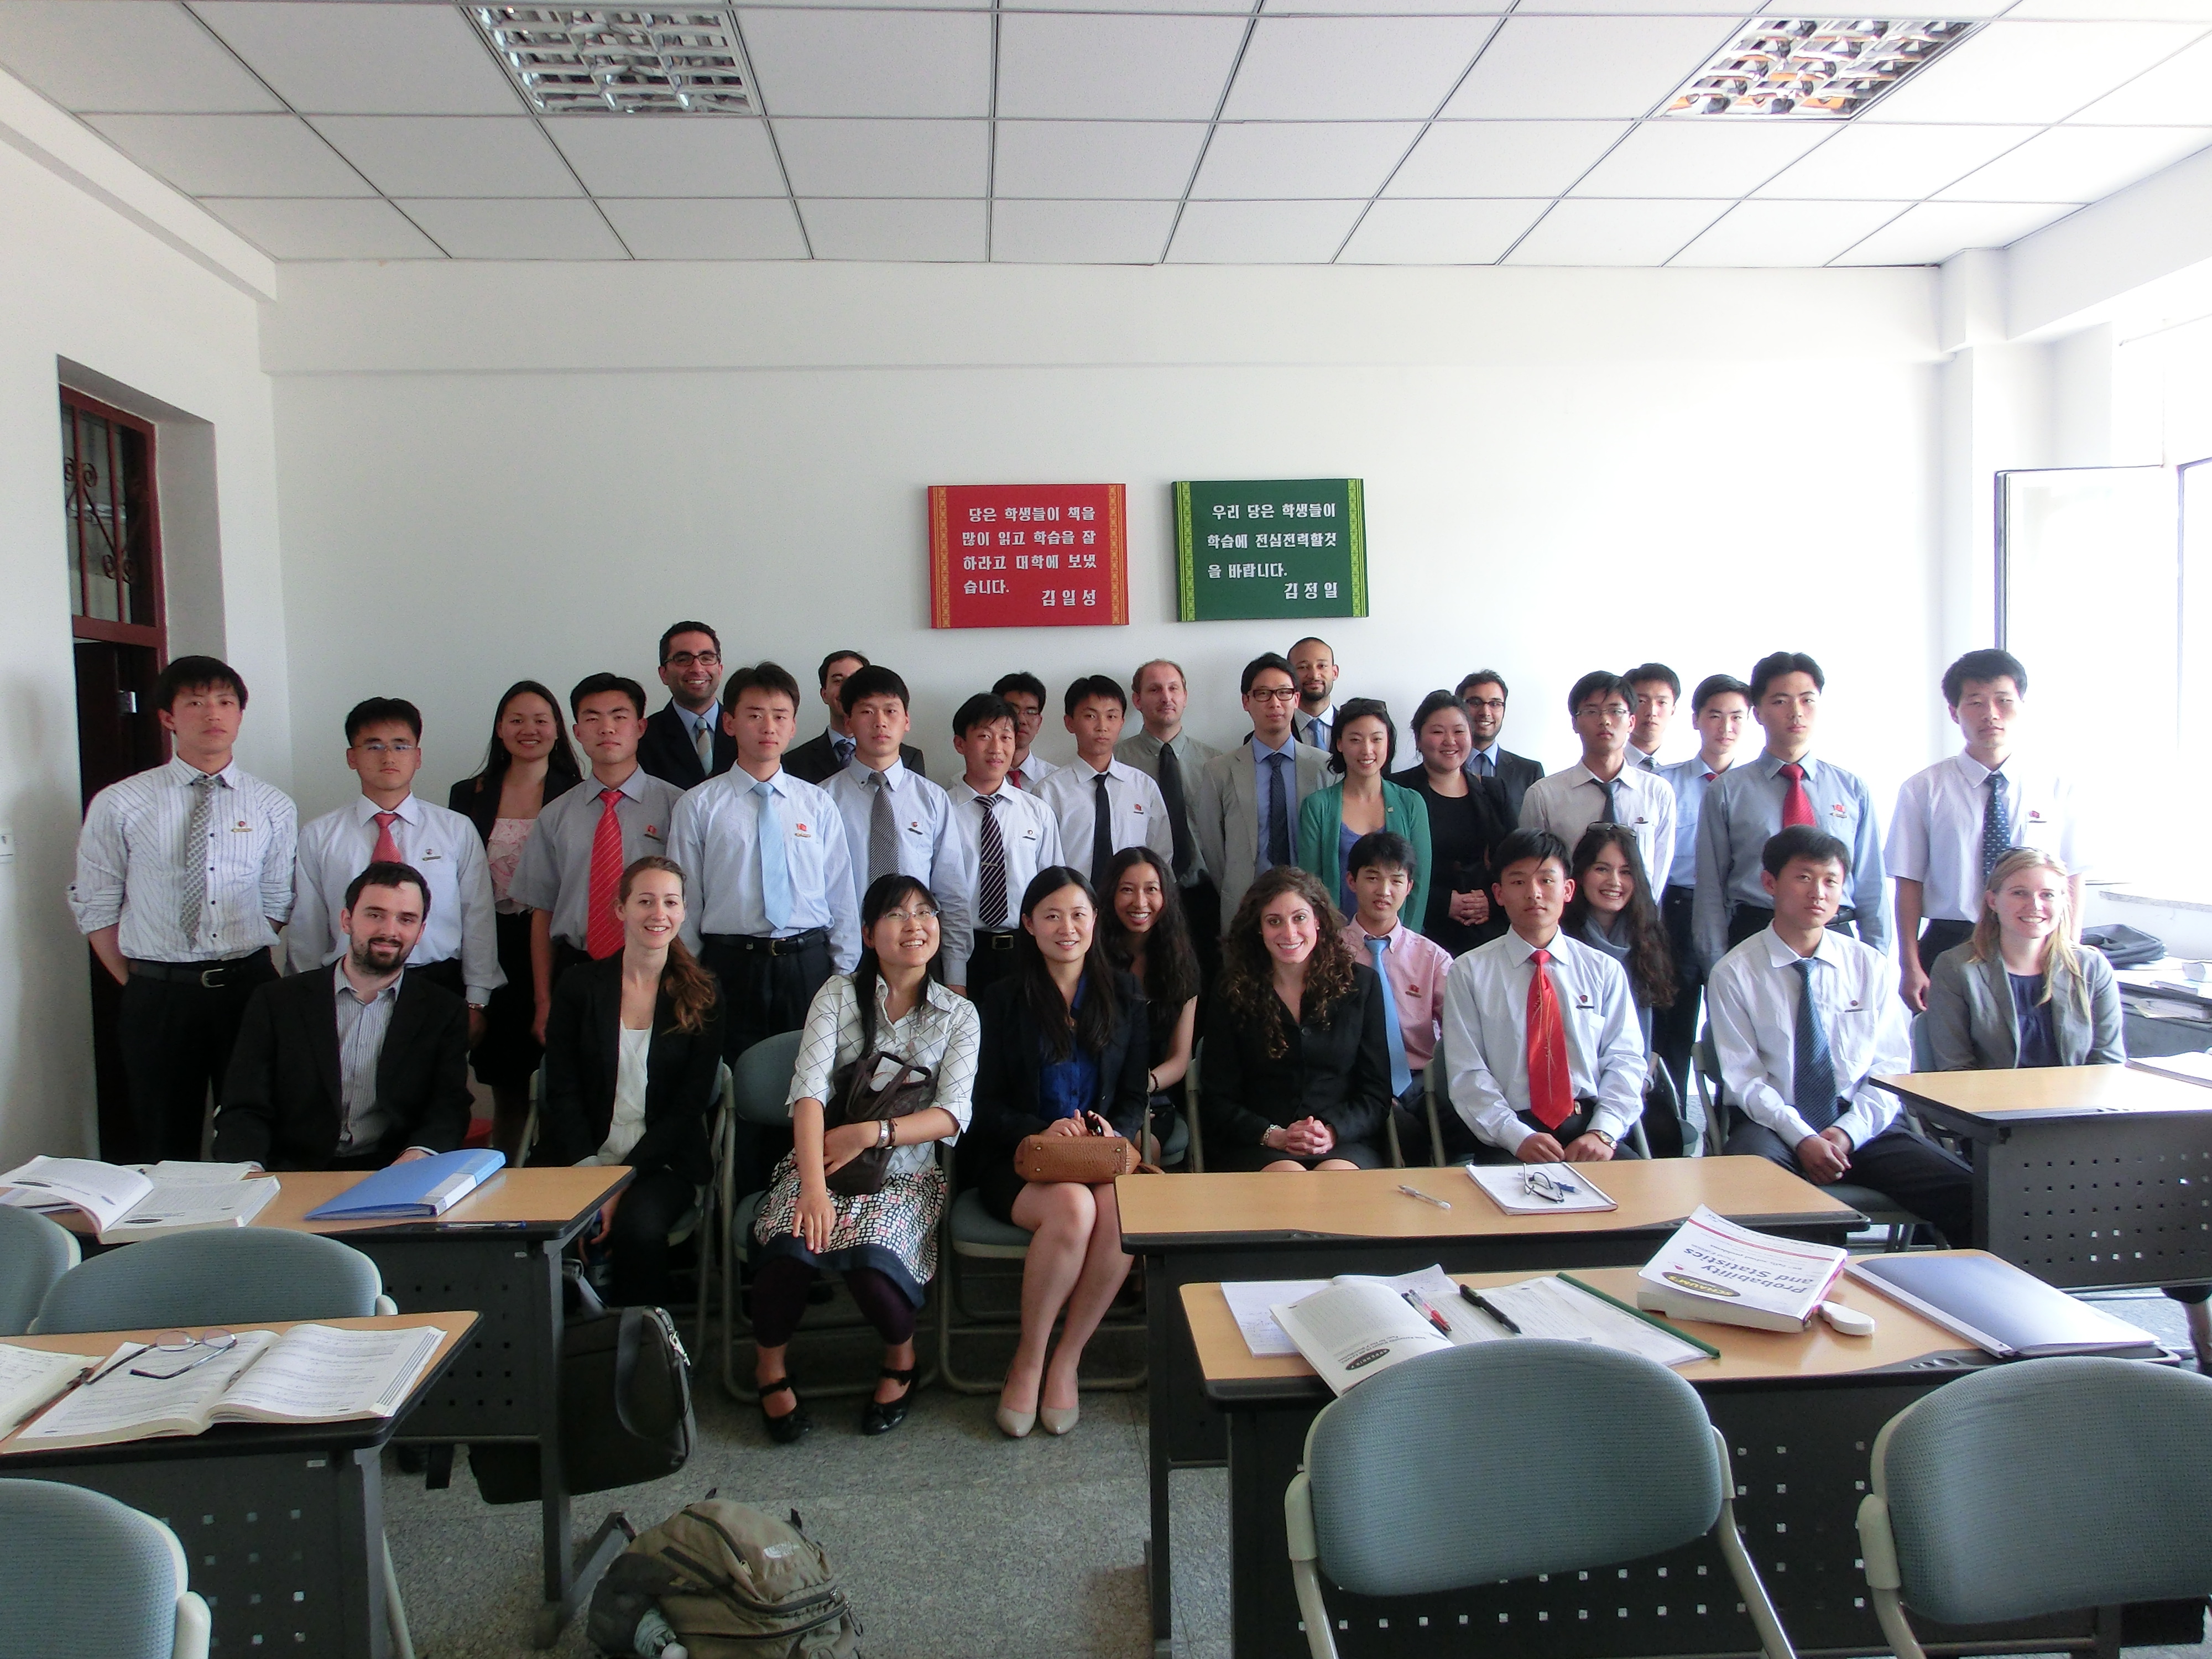 https://en.wikipedia.org/wiki/Pyongyang_University_of_Science_and_Technology#/media/File:Columbia_SIPA_students_at_PUST_in_DPRK_%2810682515504%29.jpg